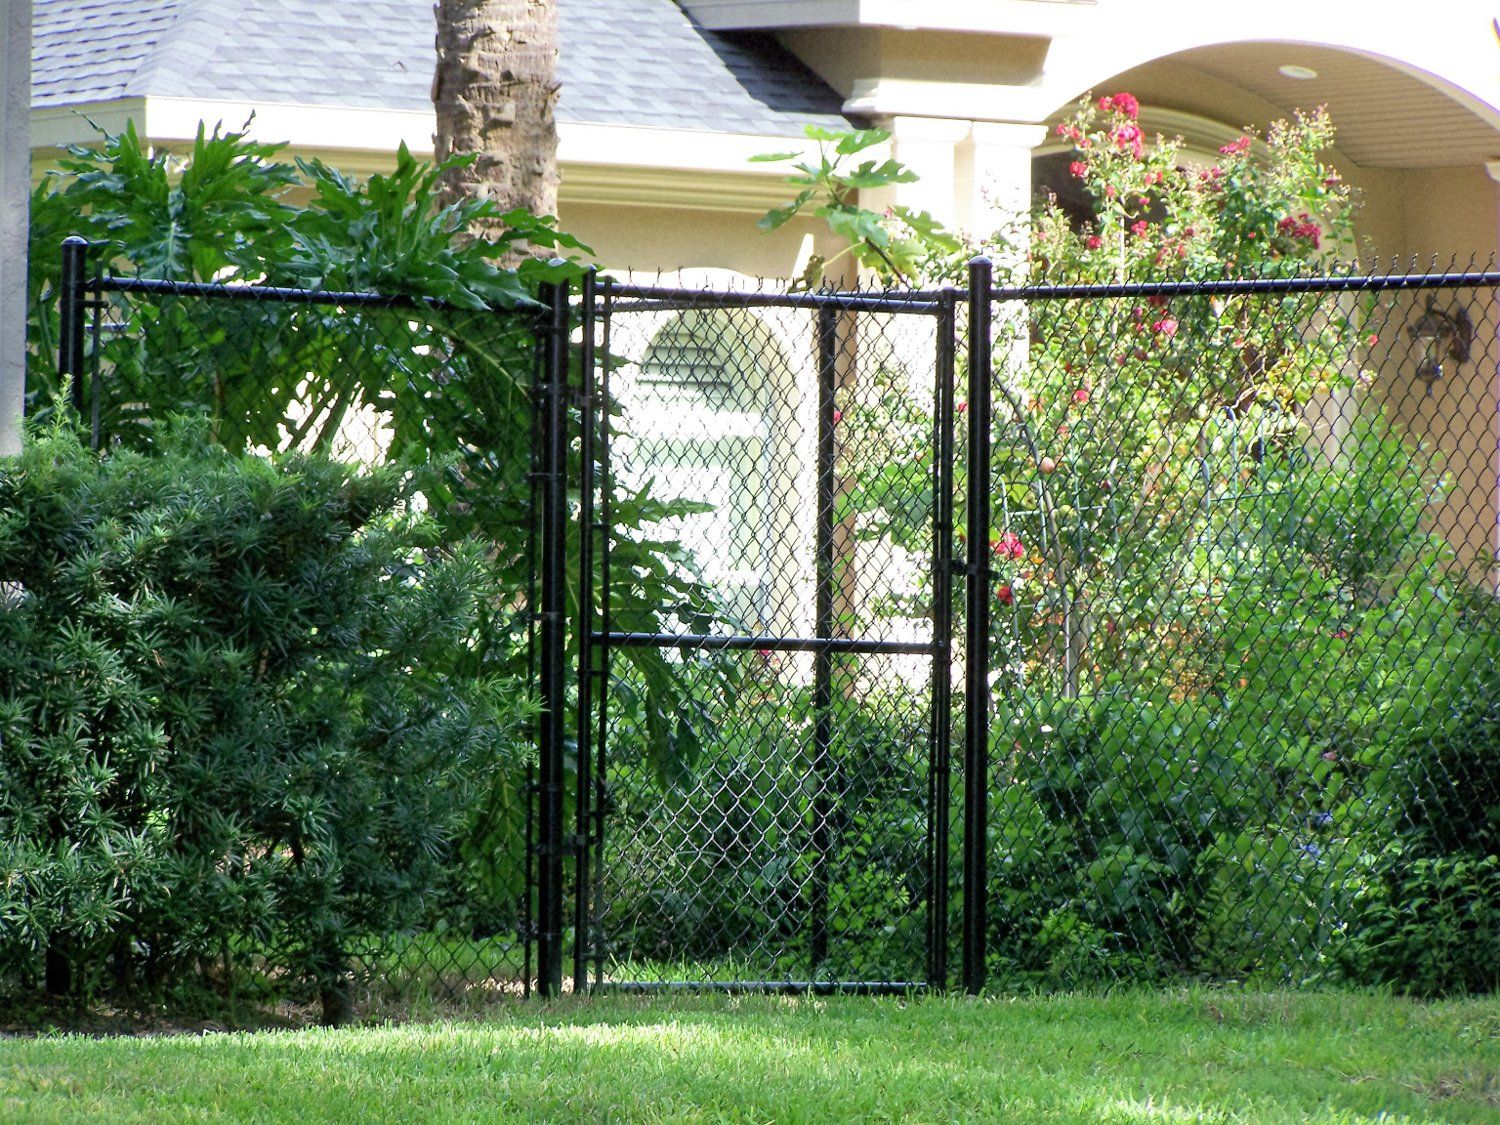 4th home with iron fence - Fencing in Ocala, FL